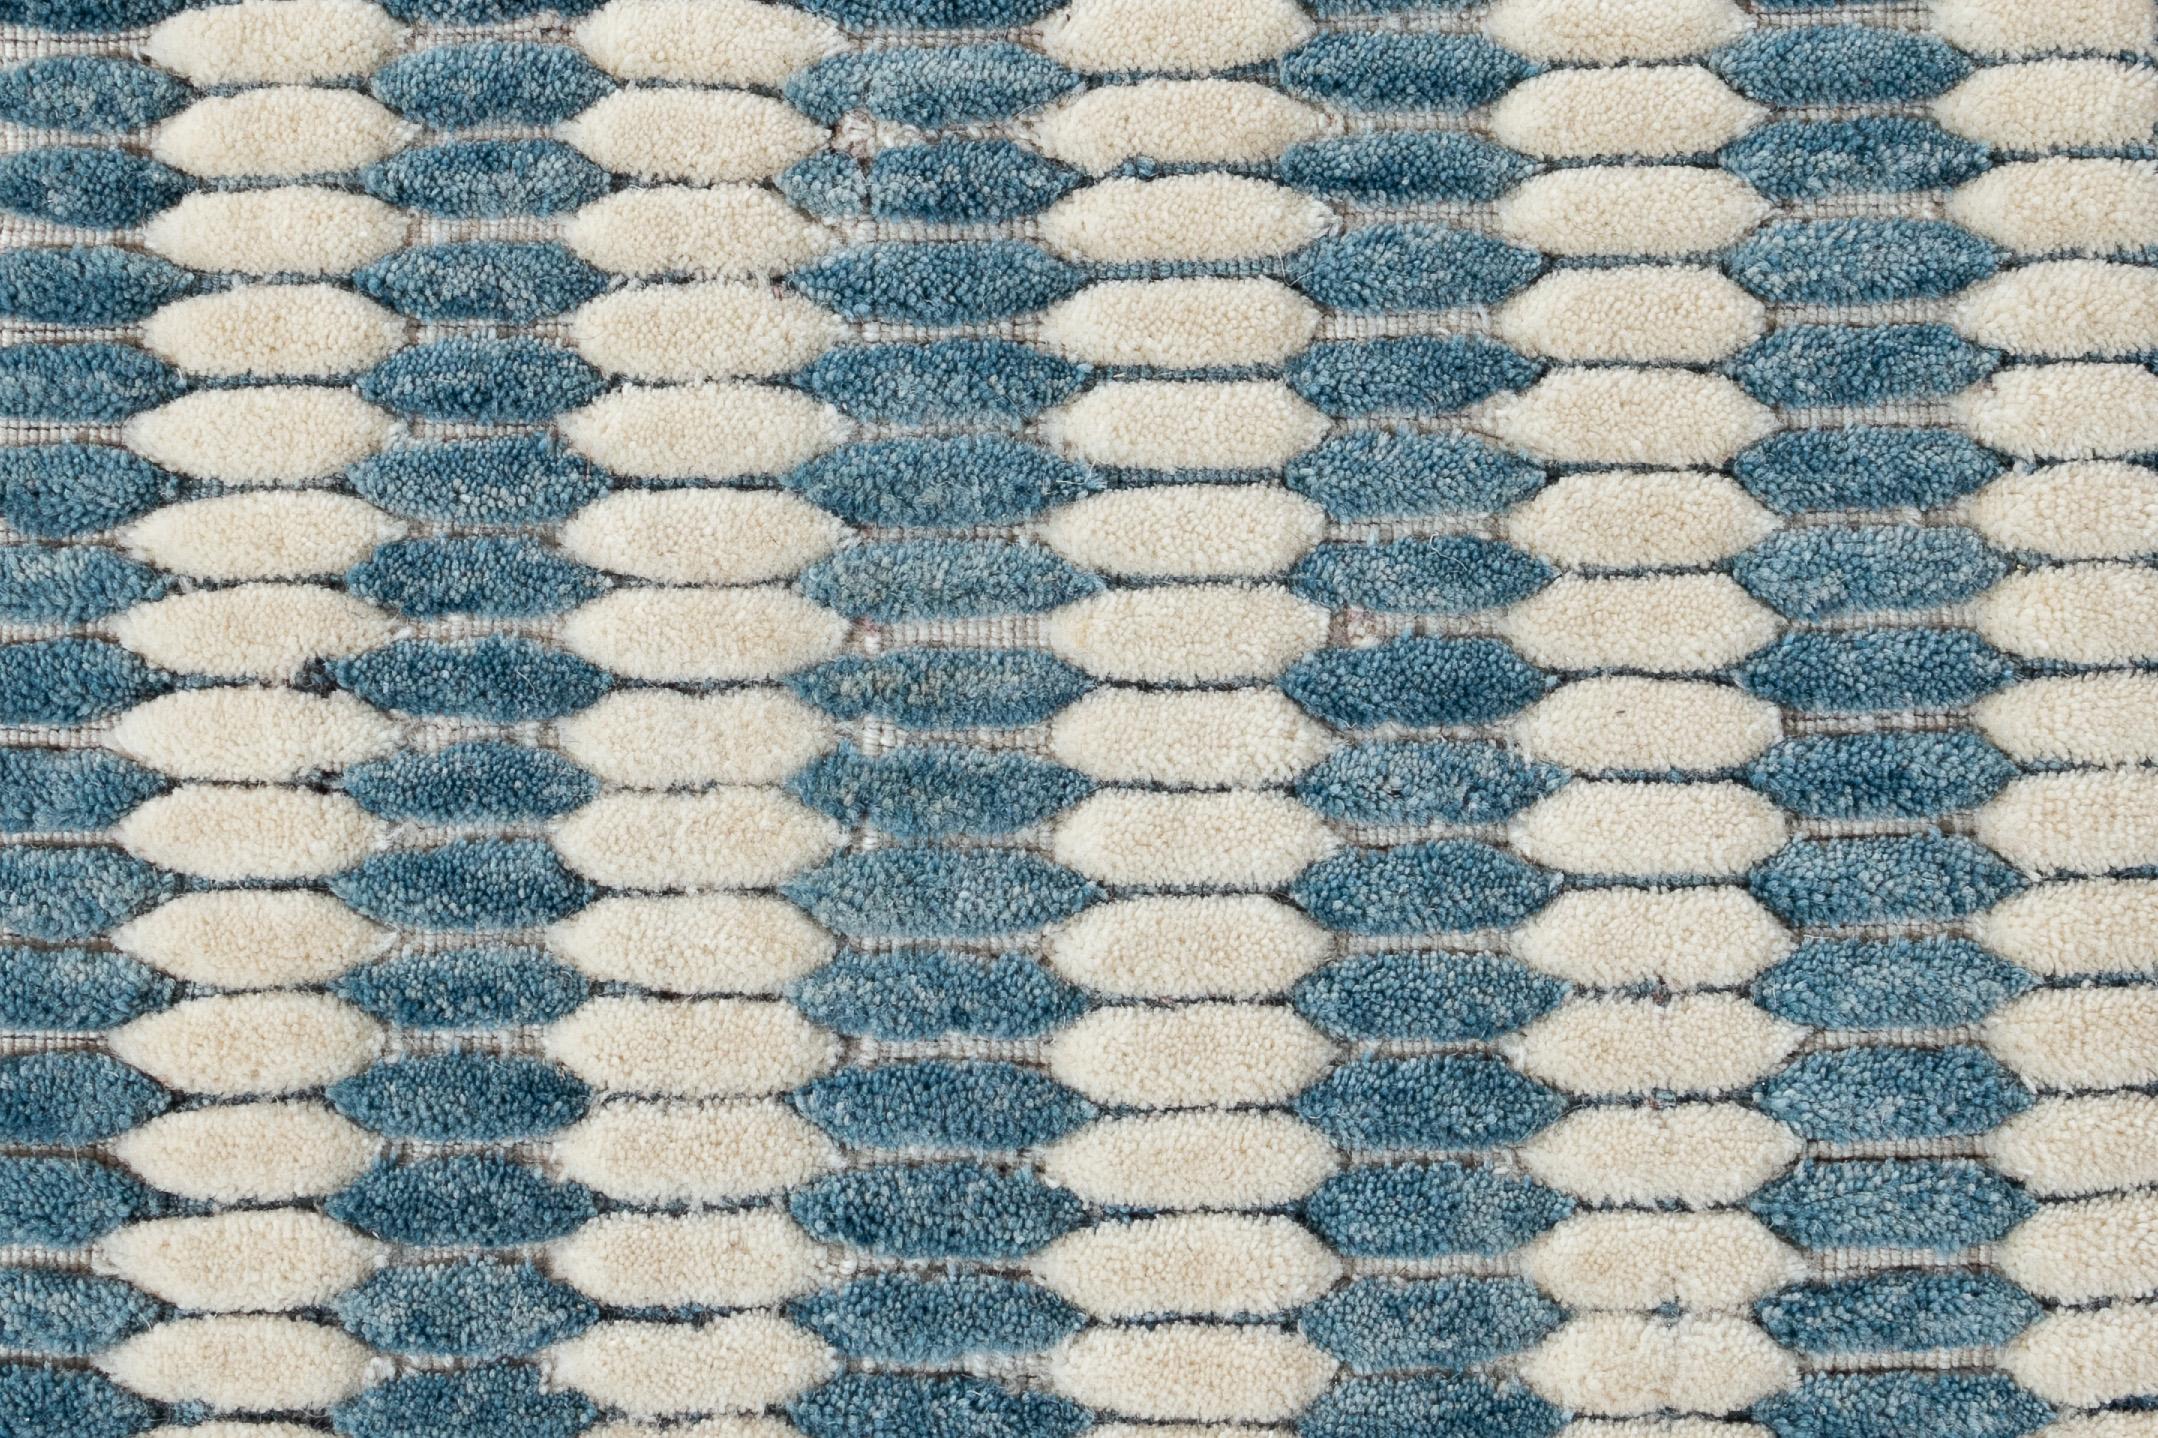 Hand knotted 100% wool custom rug. Custom sizes and colors made-to-order.

Collection: Wilson Point
Material: Wool
Lead time: Approx. 12-15 wks depending on size
Available colors: As shown.

Price listed is for an 8' x 10' rug.